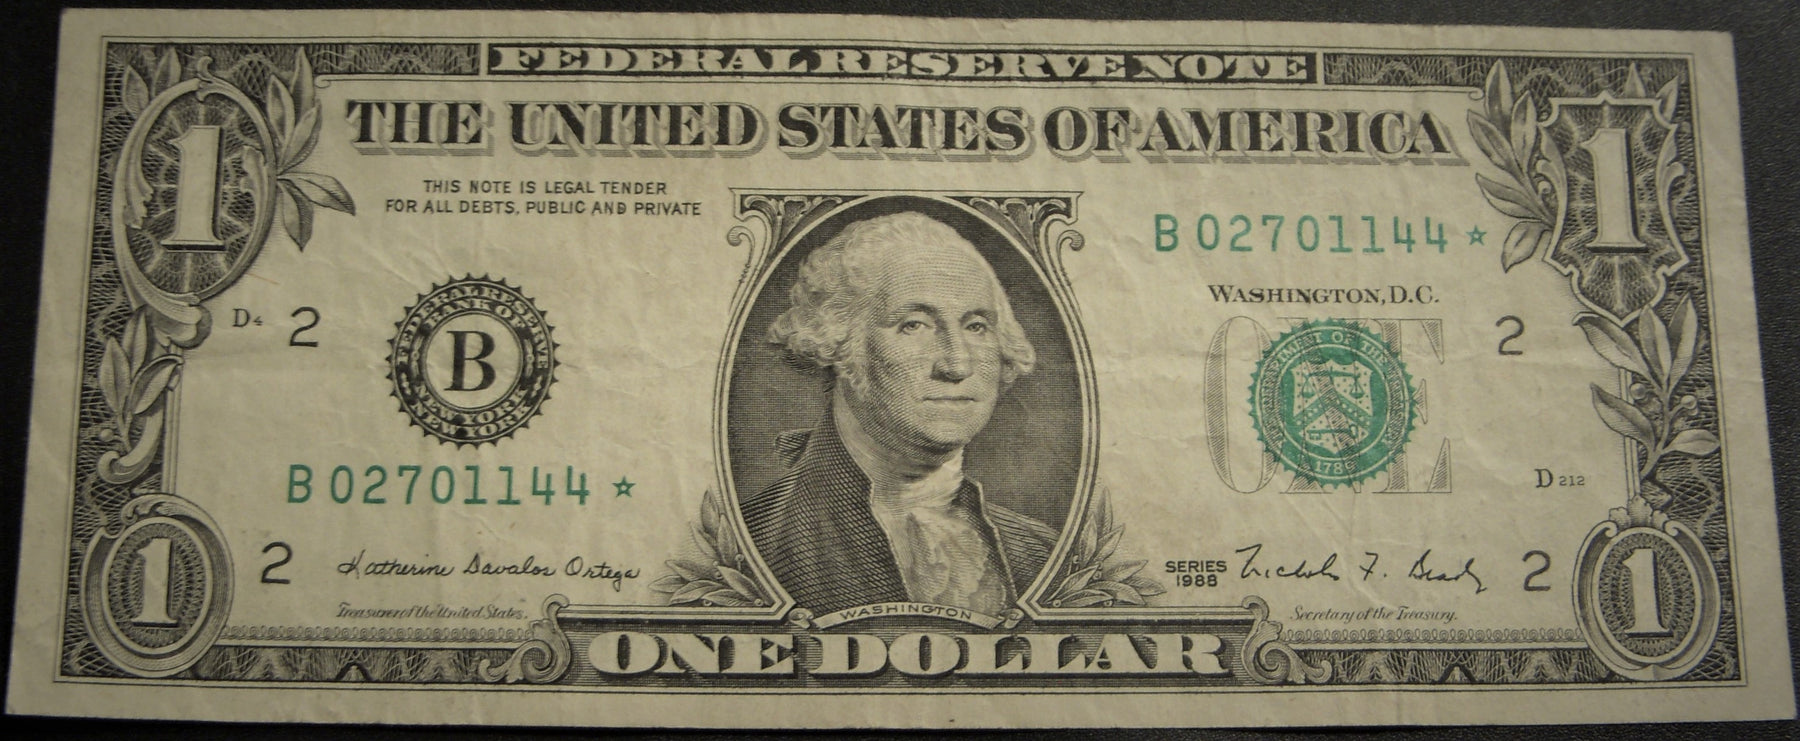 1988 (B) $1 Federal Reserve Note - Star Note FR#1914B*